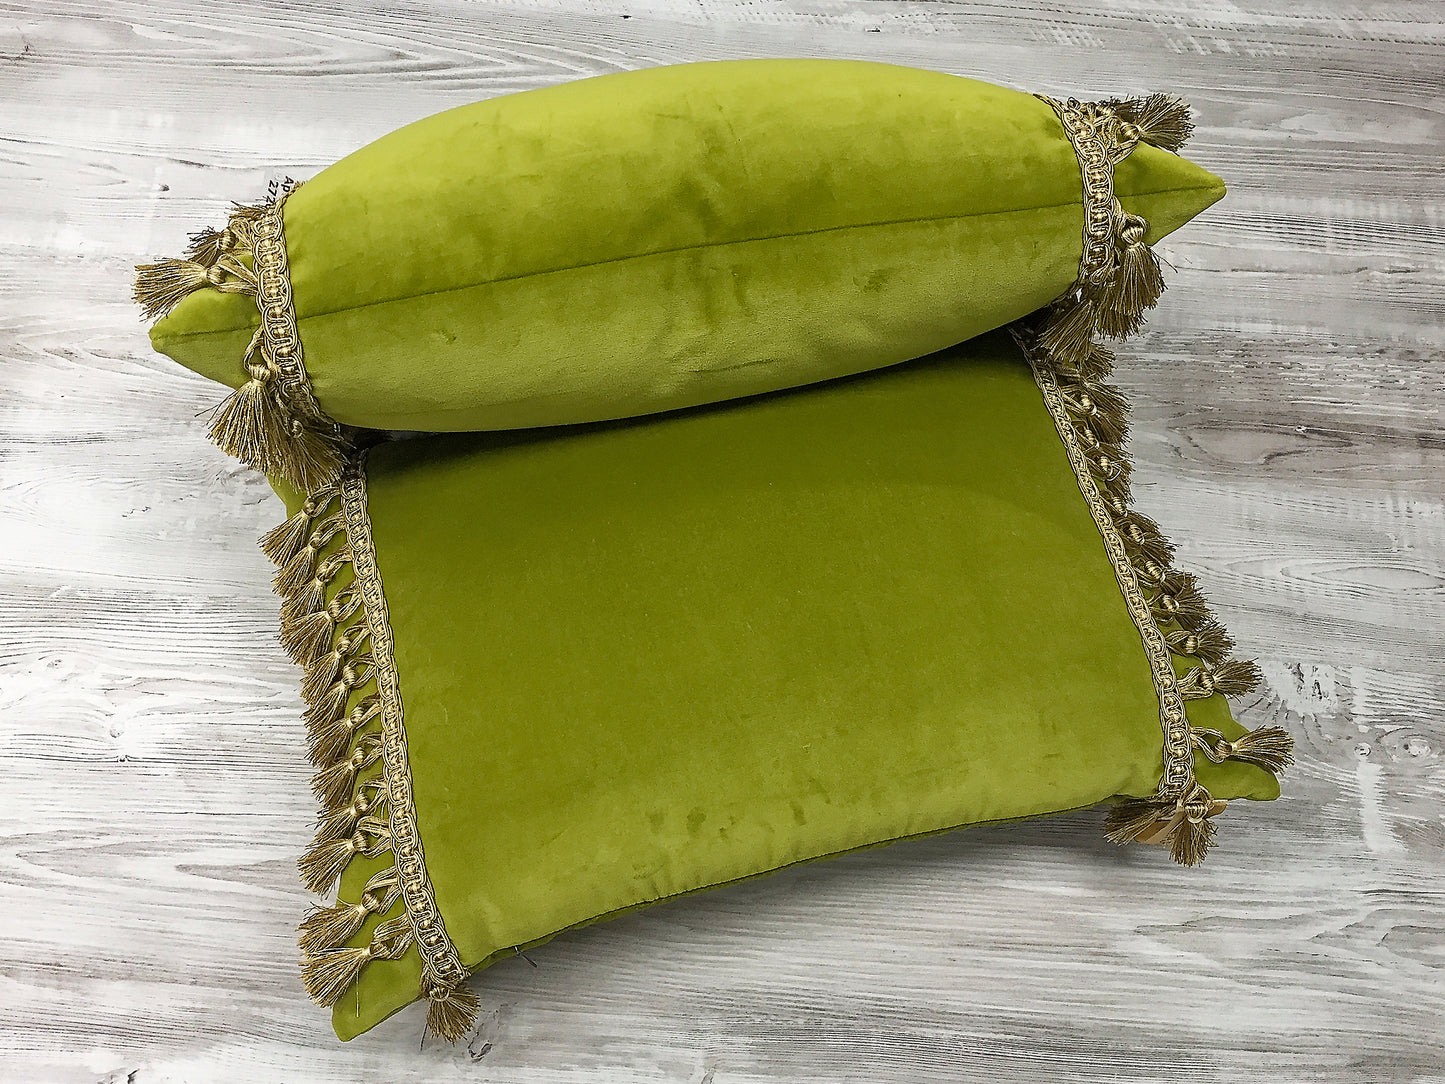 Luxury cushion collection "Green Gold Elegance" Set of 2 cushions